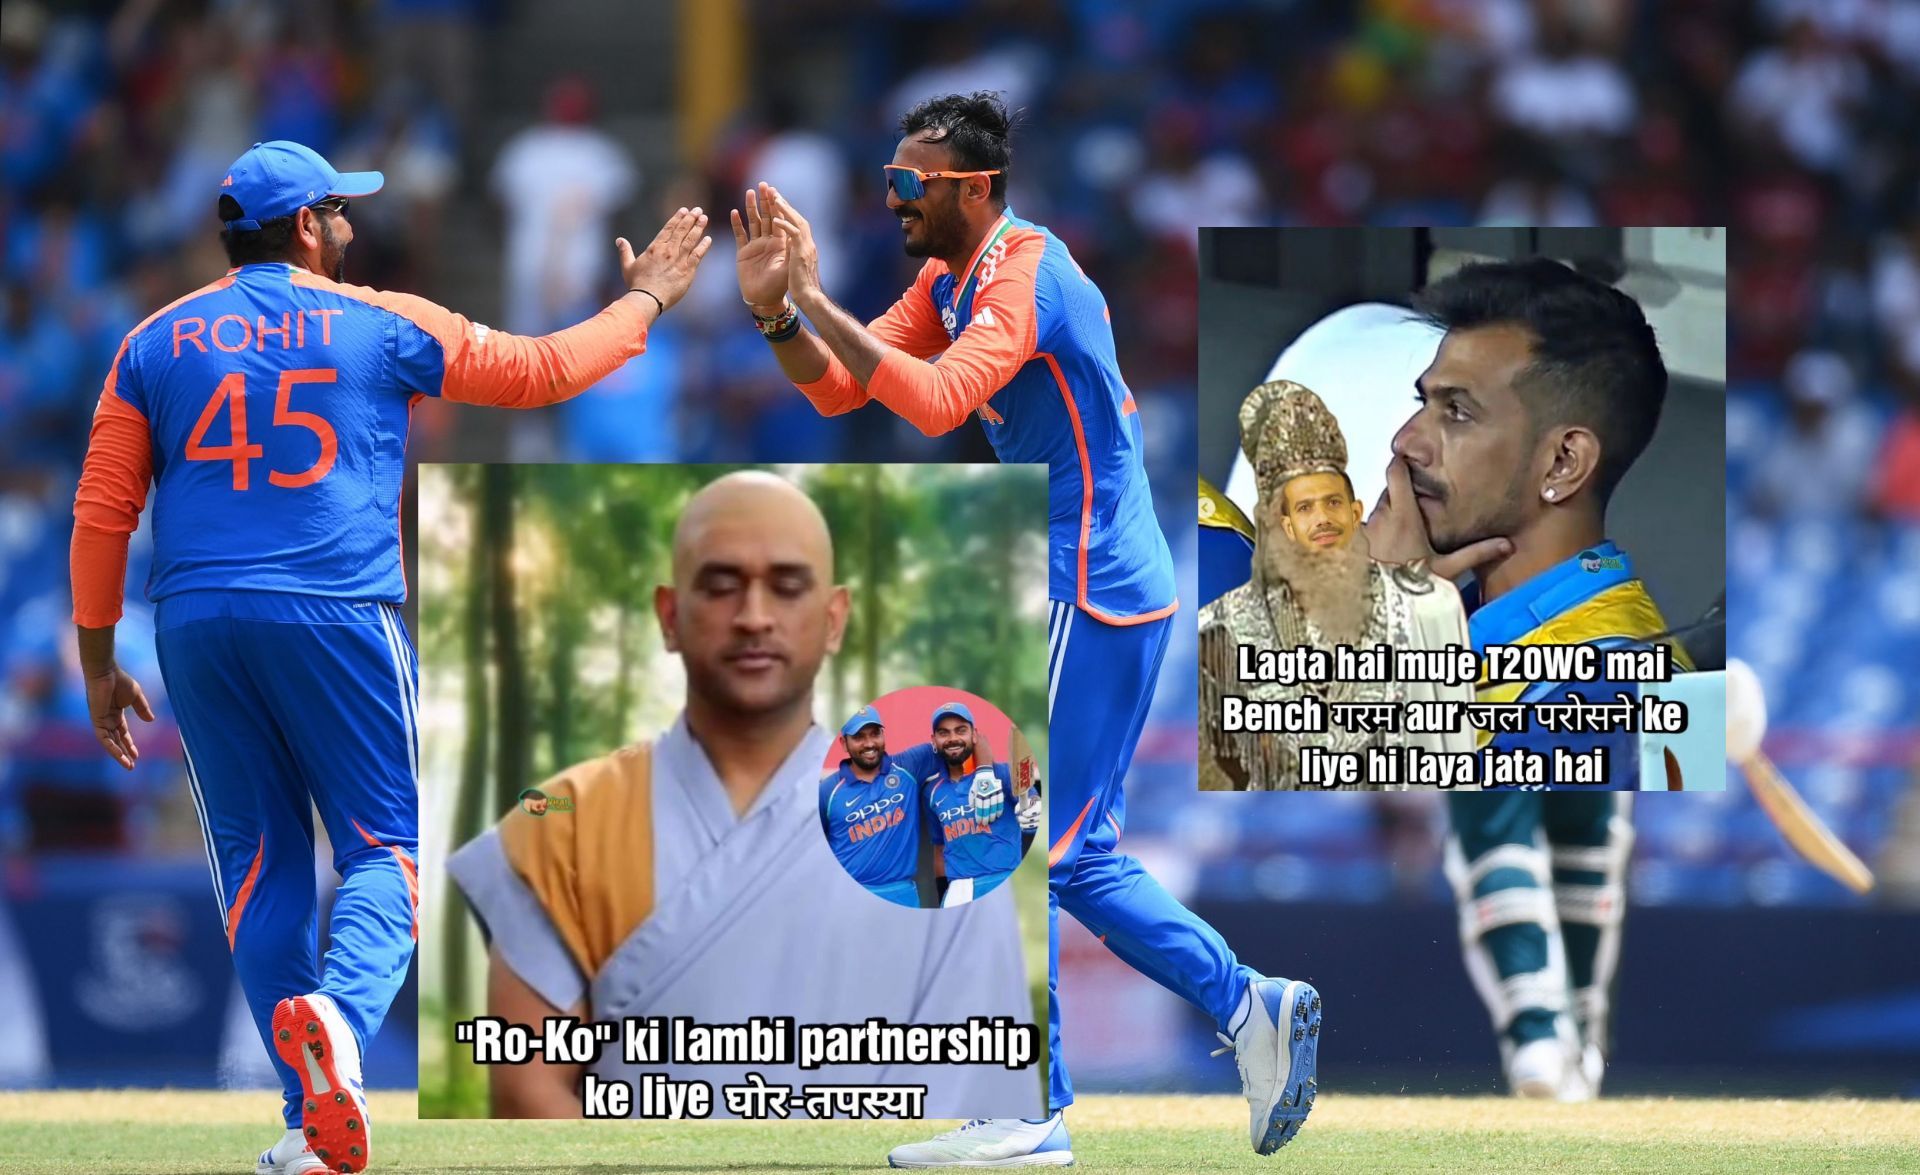 Fans share memes ahead of IND vs ENG T20 World Cup clash. (Images: @BCCI, @virat_ka_chacha instagram)